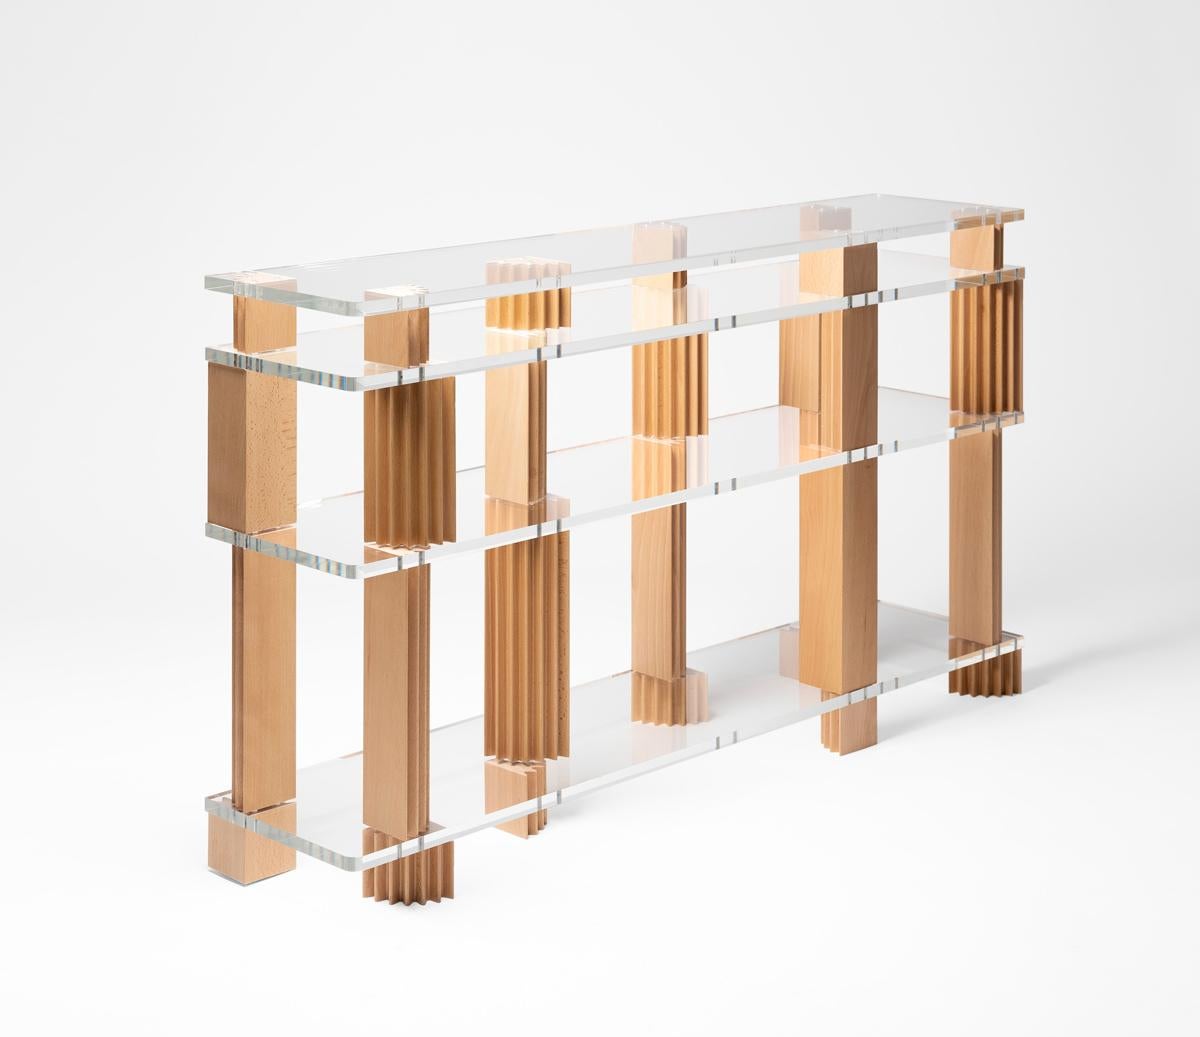 REmix vol 5. bookshelf, Limited Edition by Belén Moneo
Limited to 3 Units
Dimensions: 150 x 37 x H 150 cm
Materials: varnished beech wood columns. Transparent methacrylate shelves.

Moneo Brock presents a new edition to the REmix project